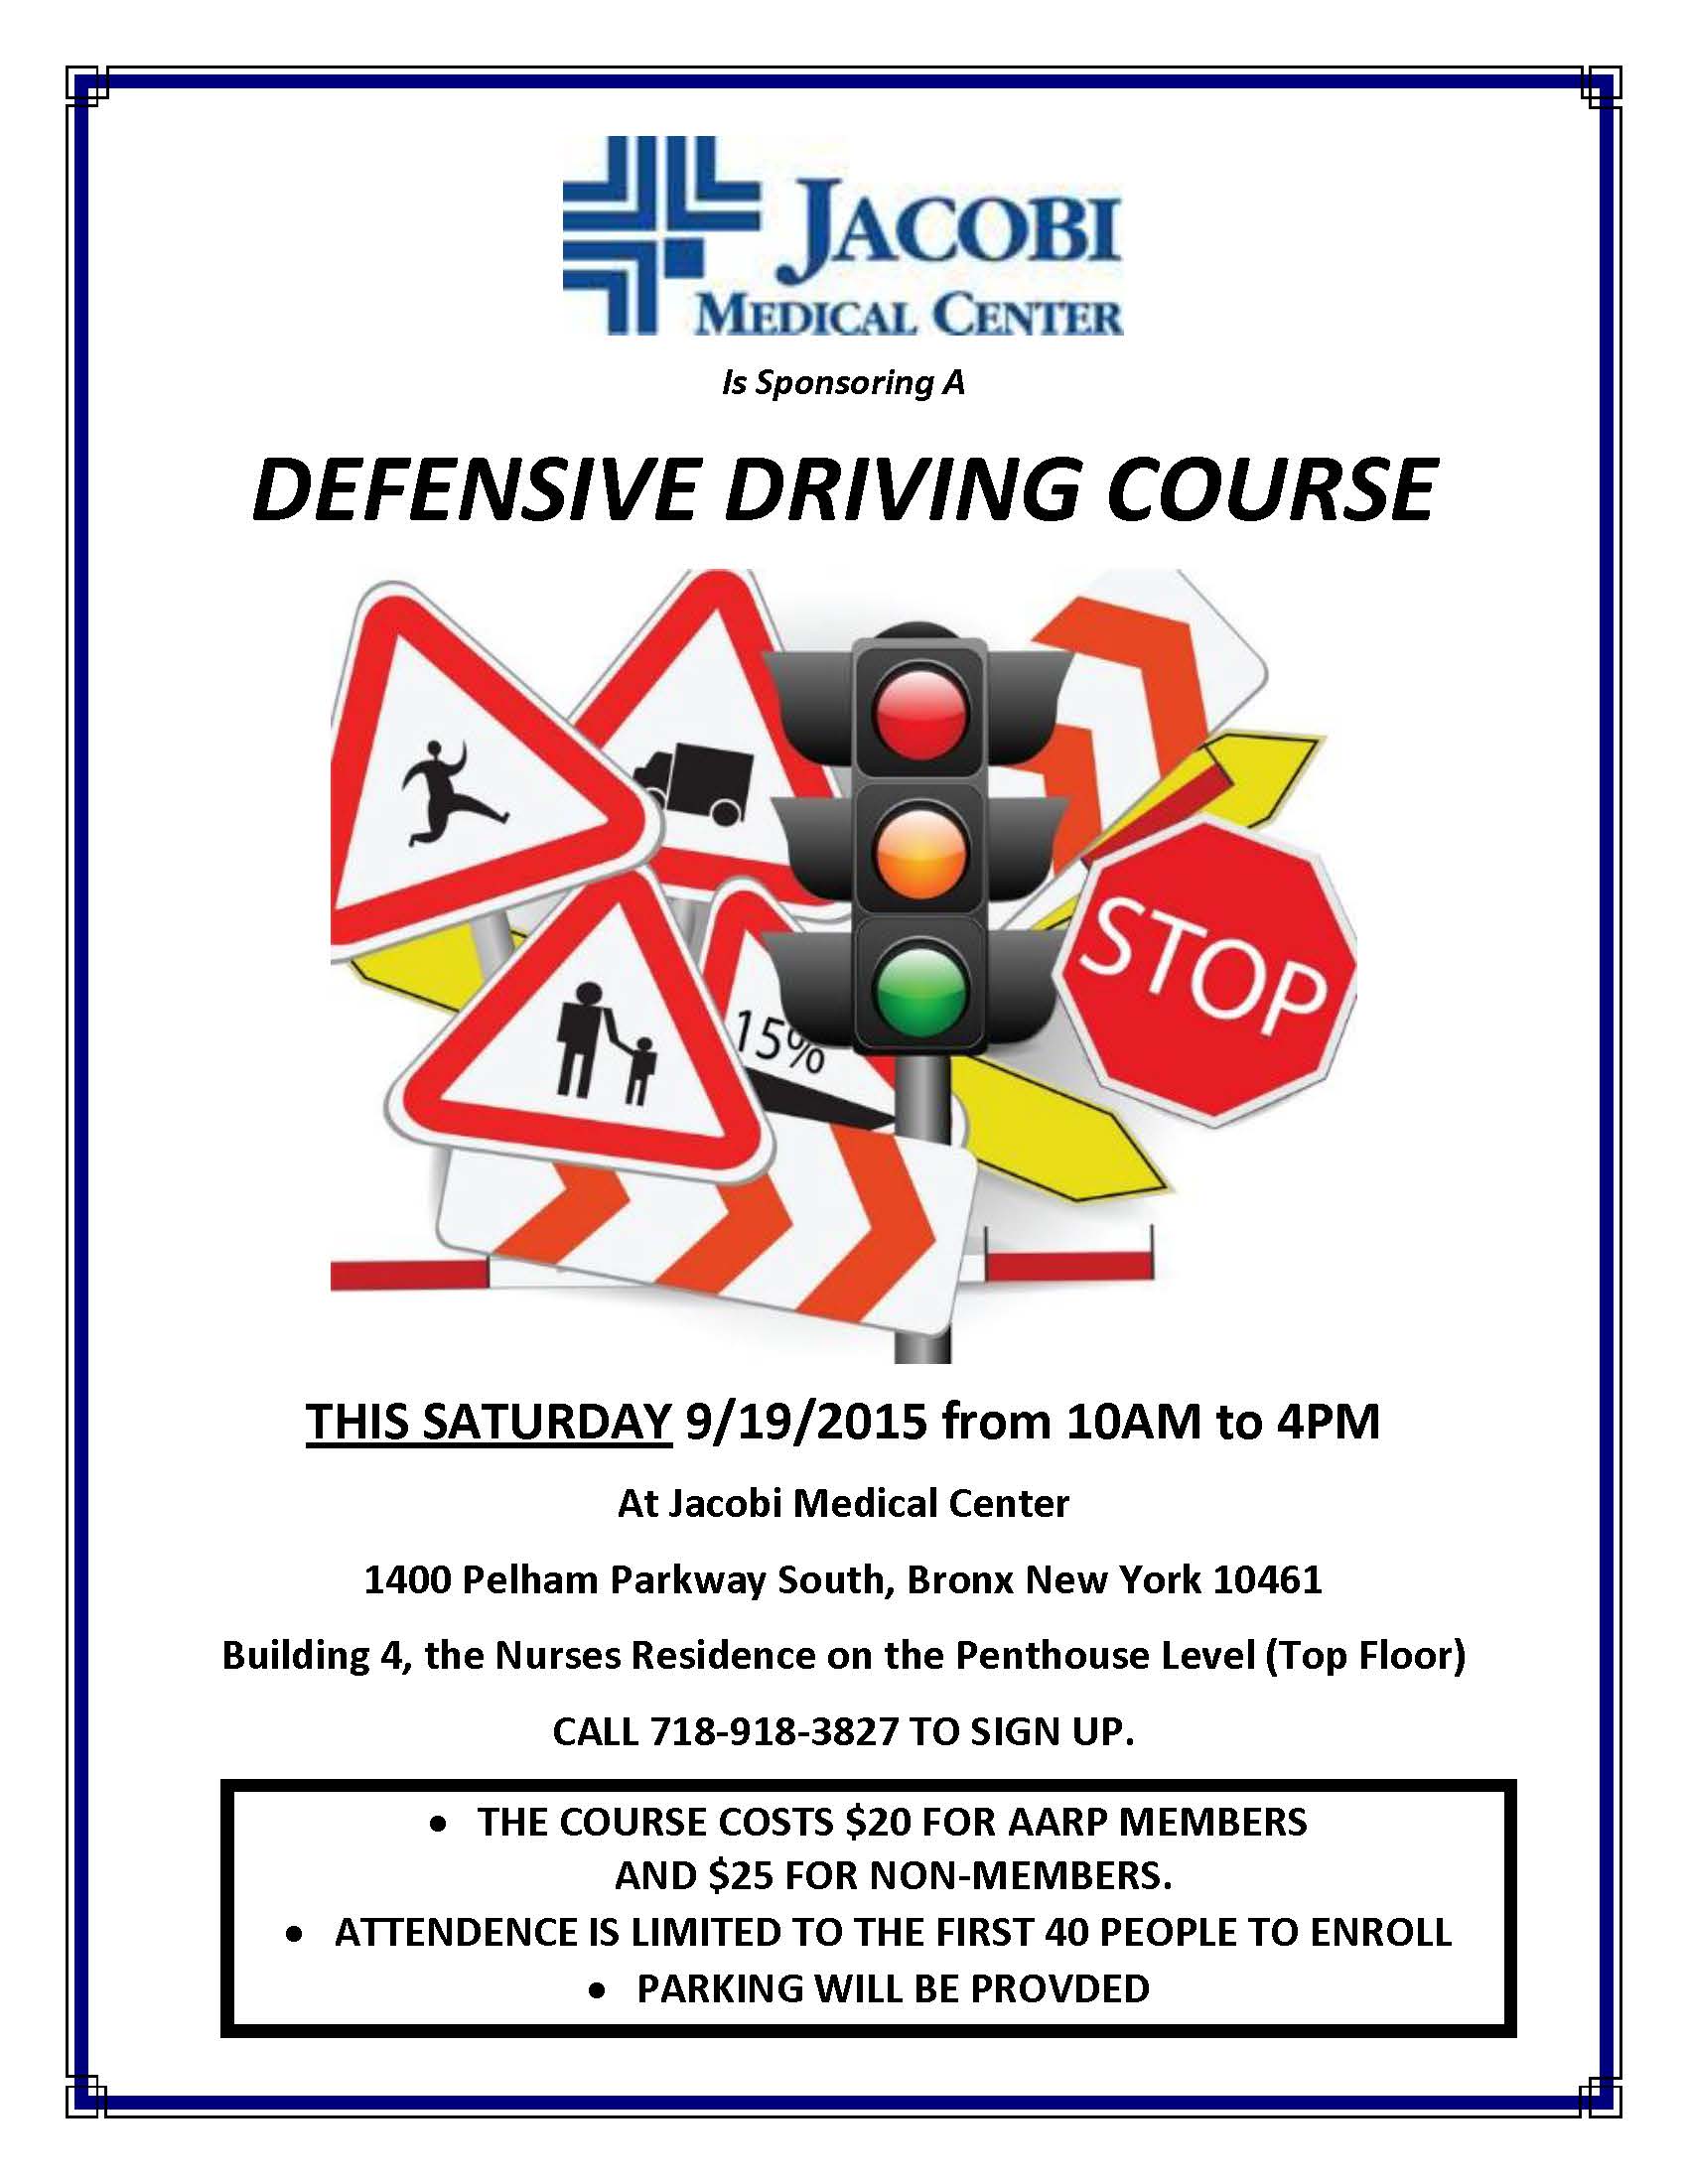 driving course